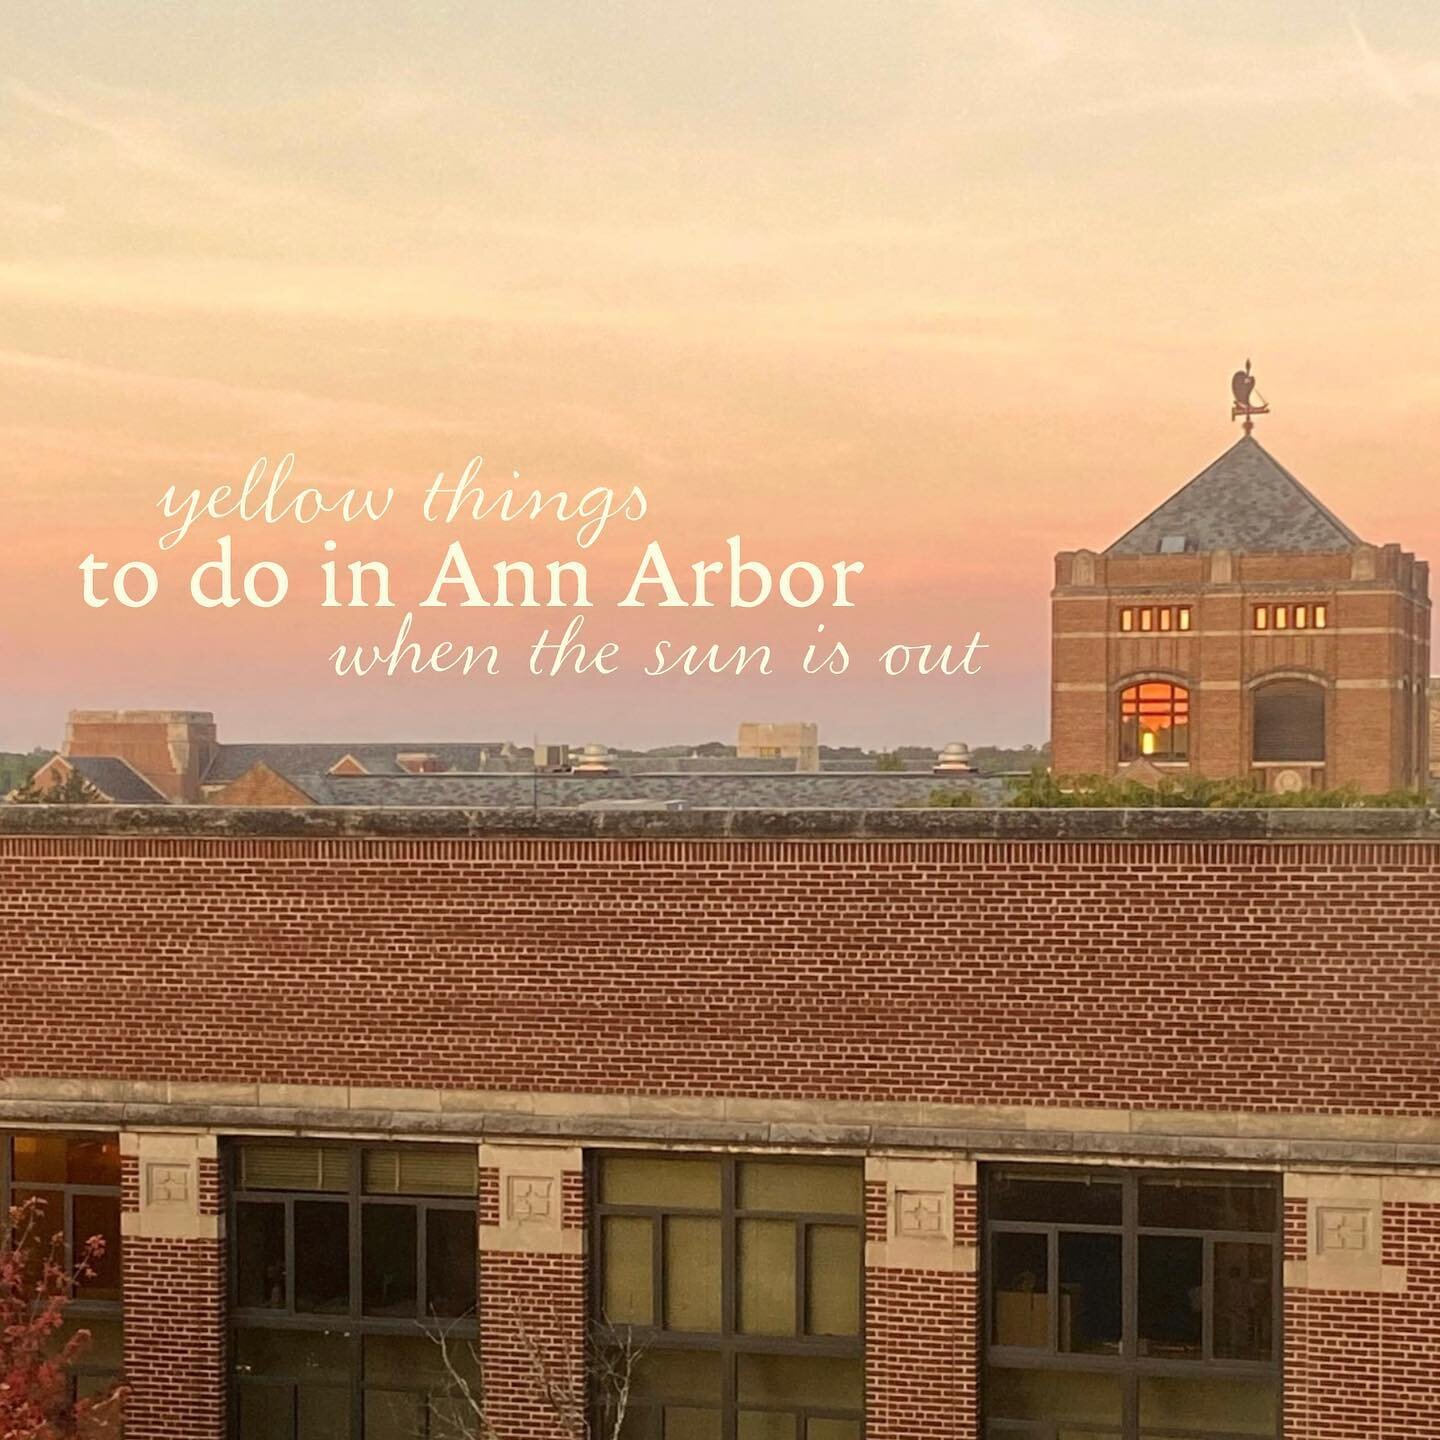 Now that spring is here, here are four yellow things to do in Ann Arbor.

Content: @htwomey 
Design: @kayleekaems